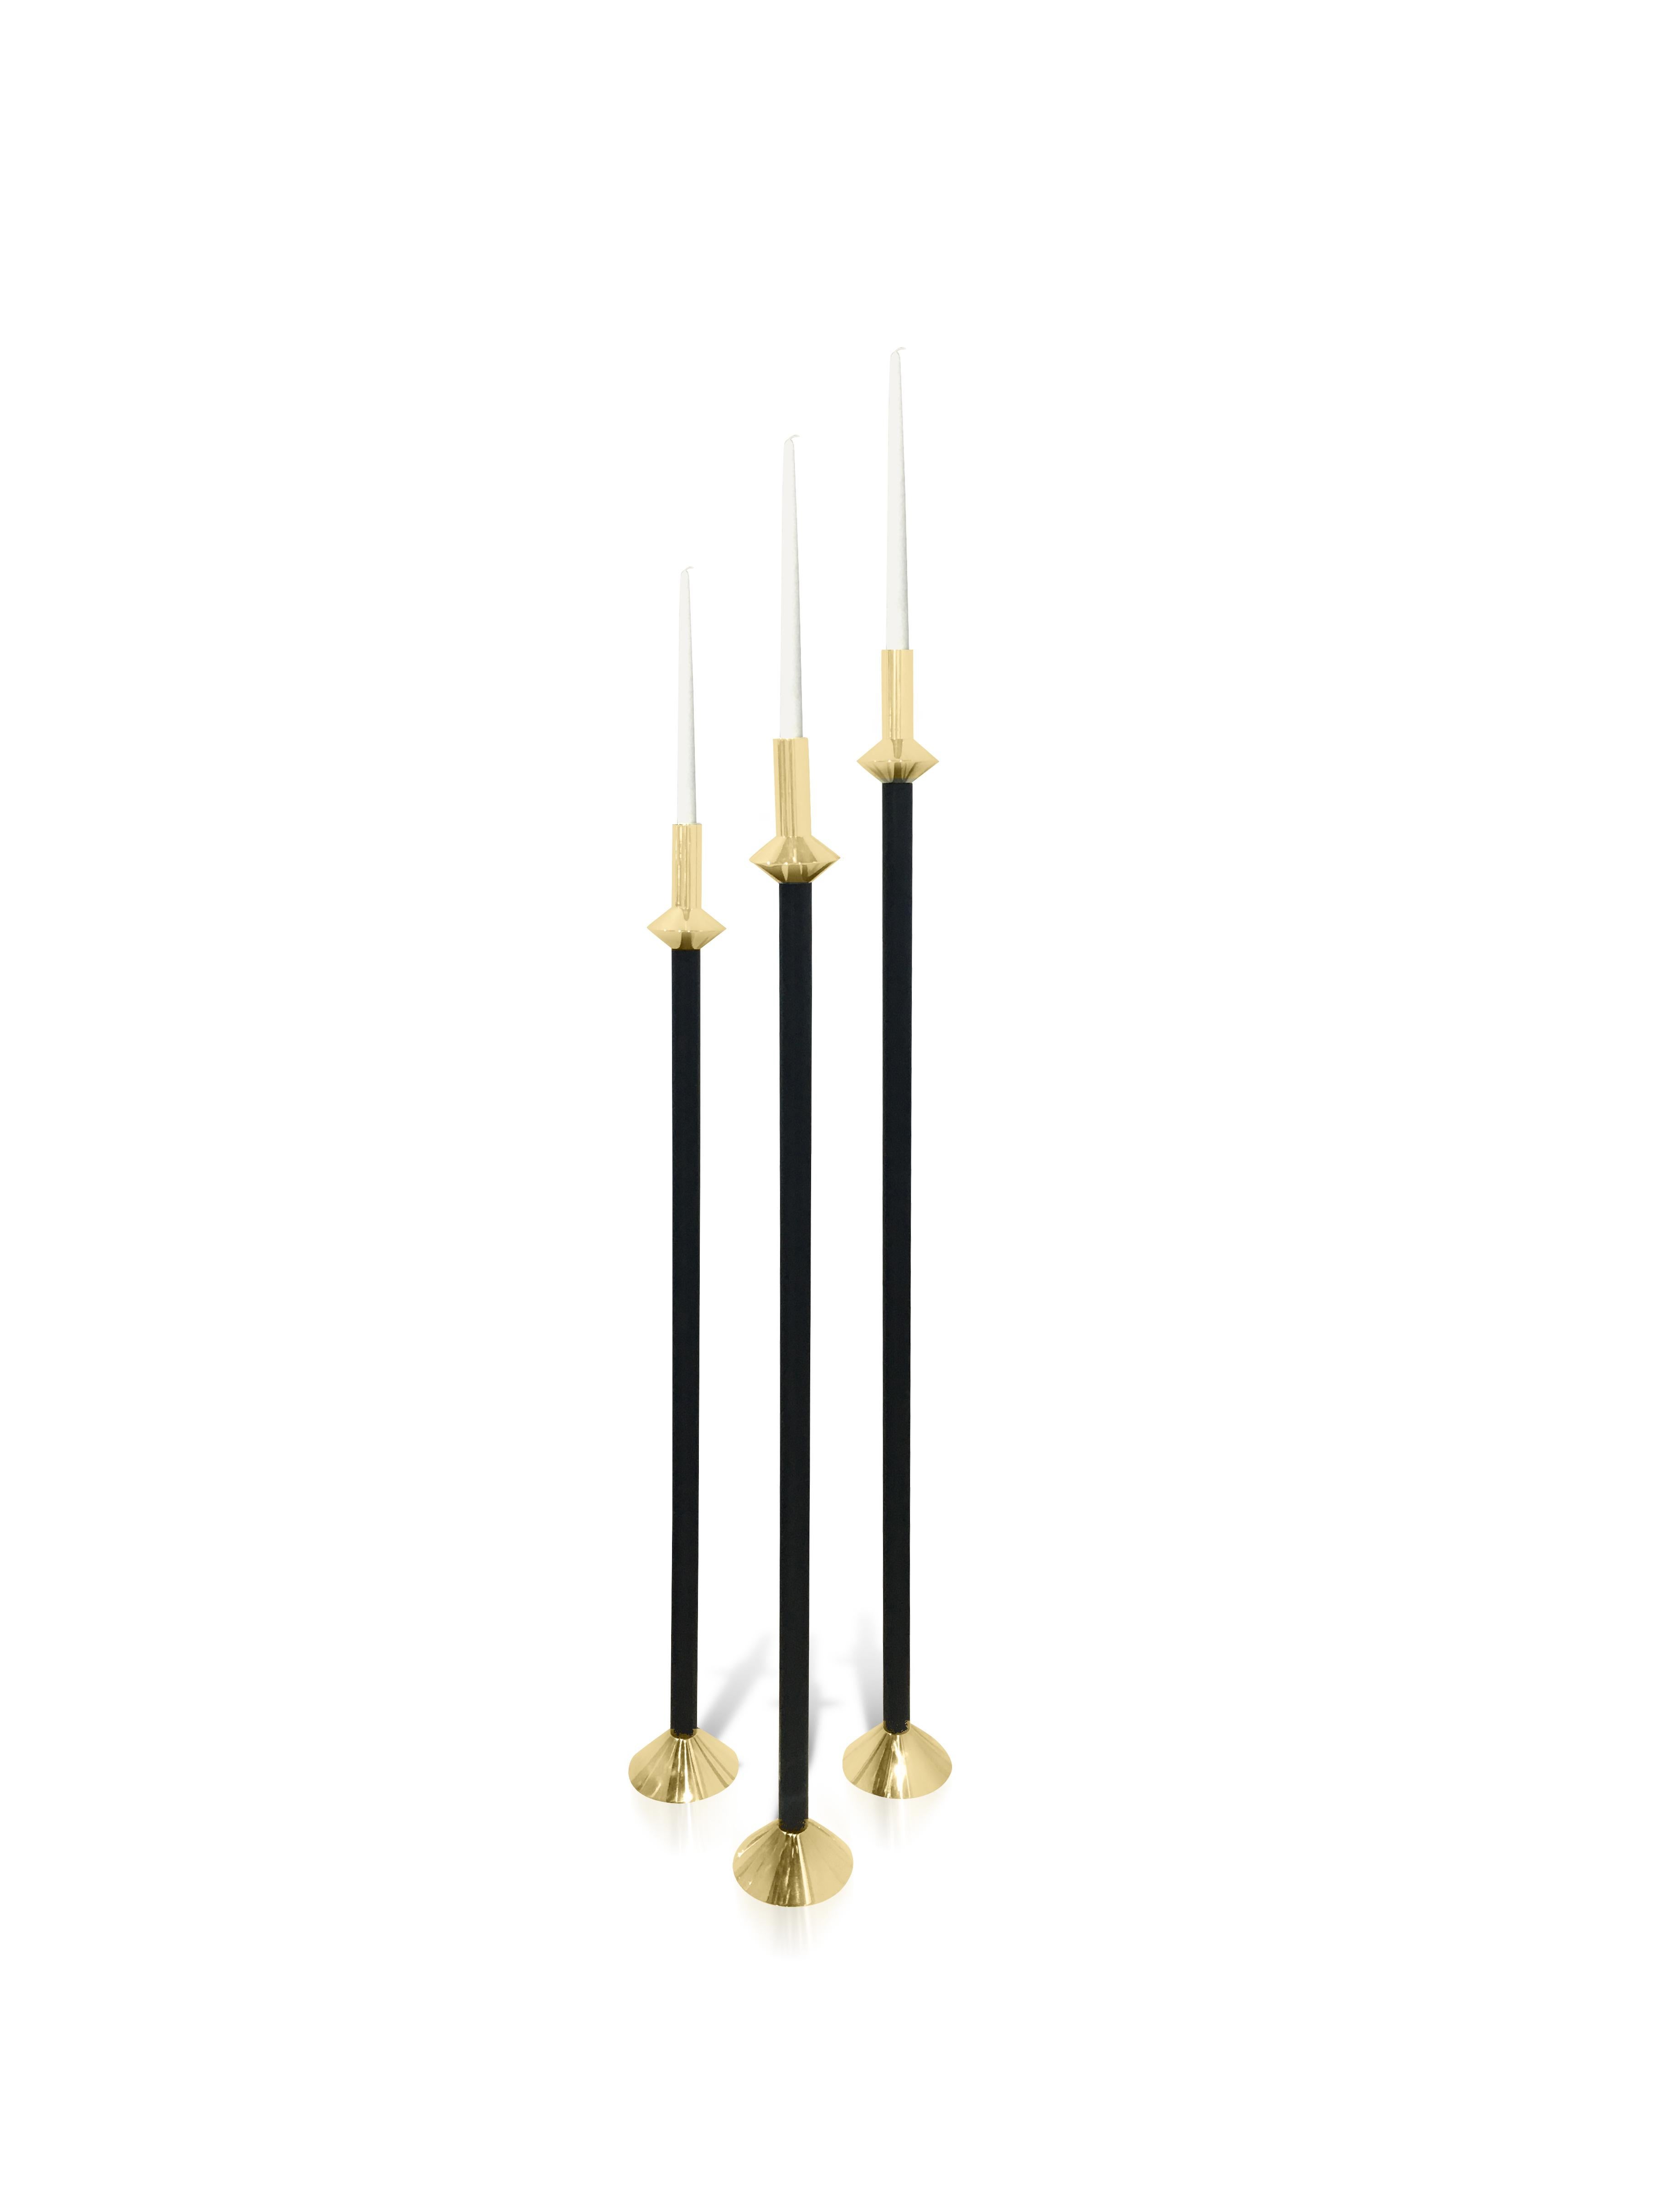 Contemporary Swedish Brass and Leather Modern Minimalist Candleholders, Small In New Condition For Sale In New York, NY